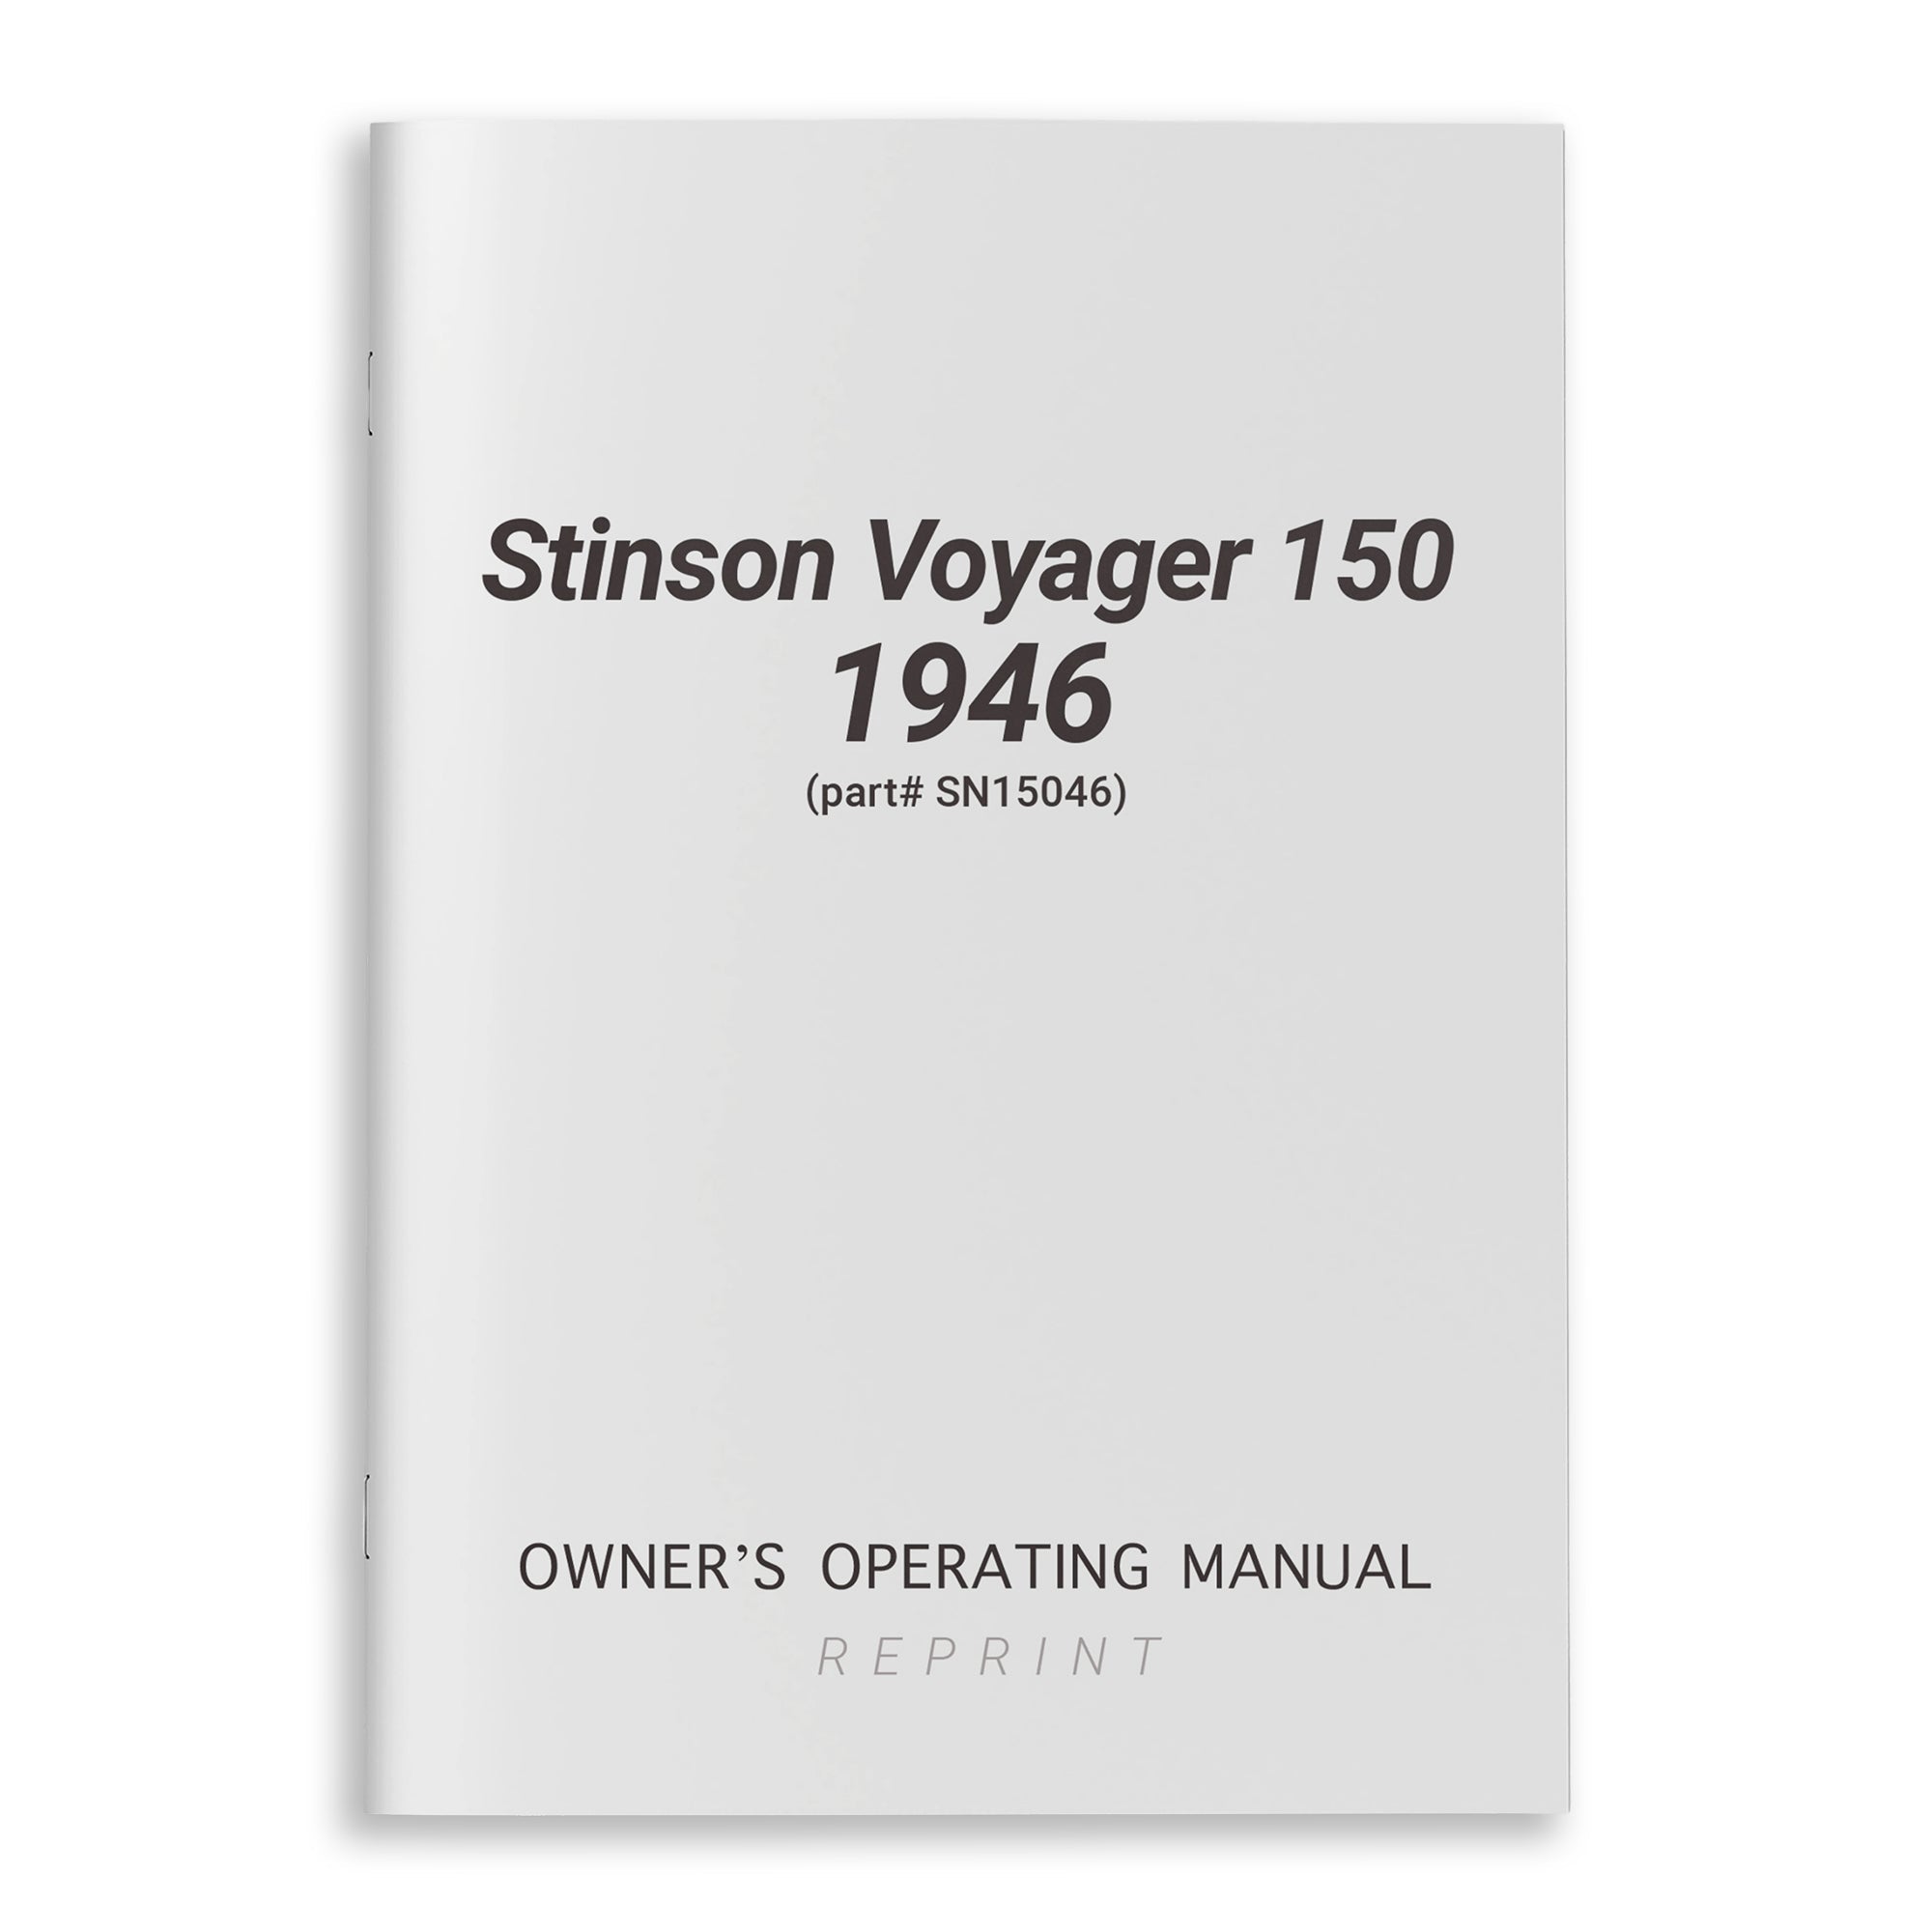 Stinson Voyager 150 1946 Owner's Operating Manual (part# SN15046) - PilotMall.com